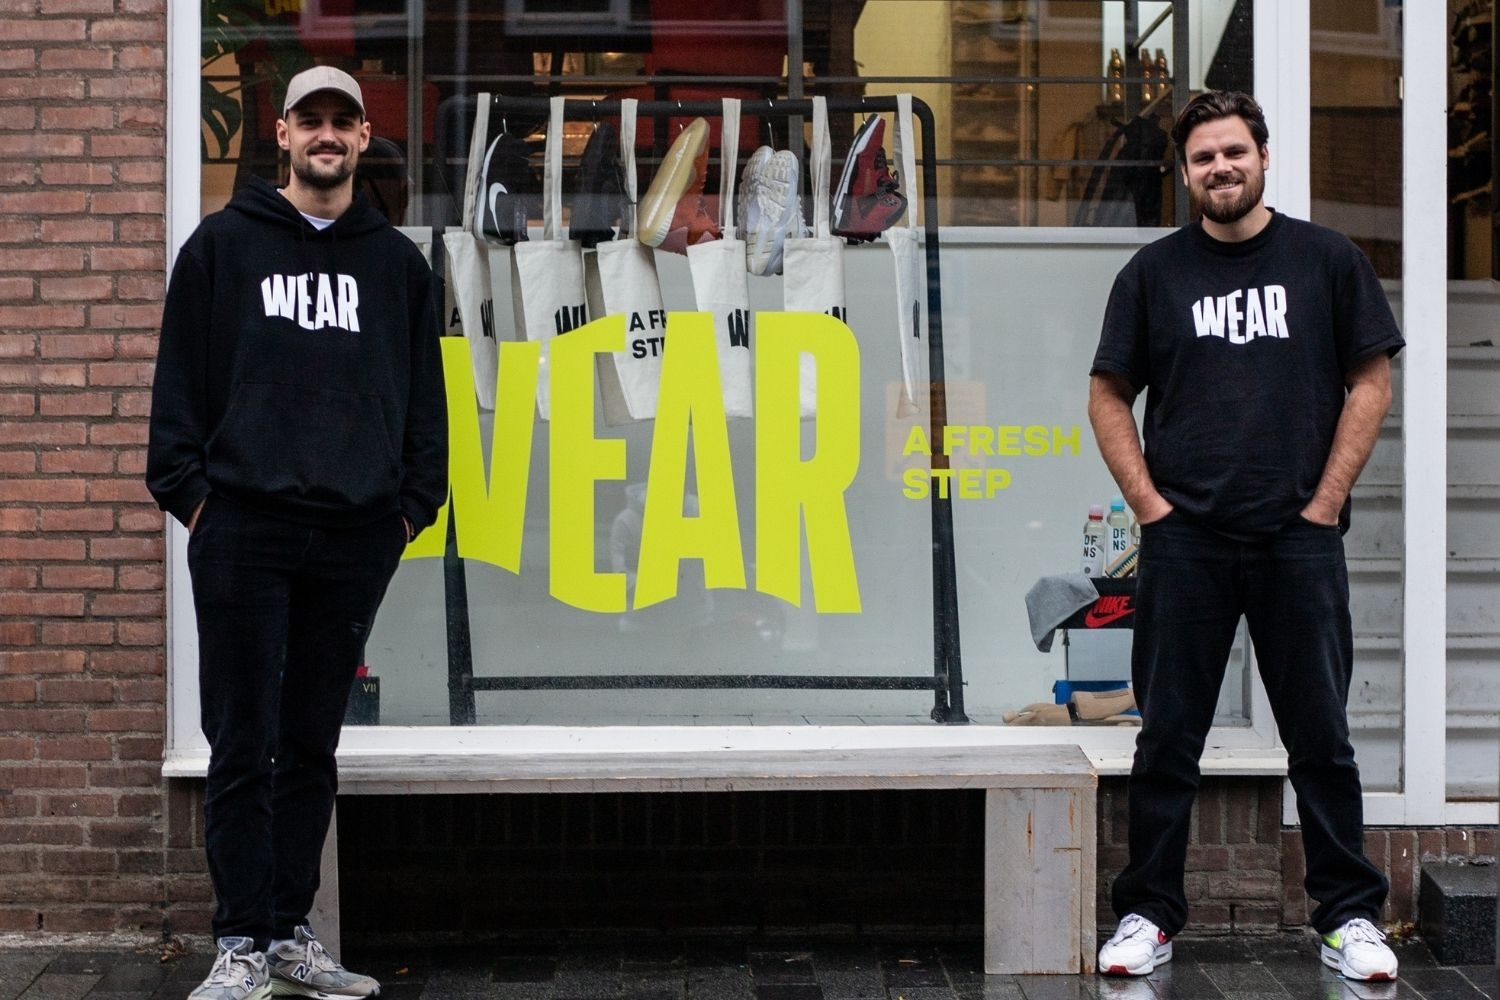 On the road to sustainability with WEAR - Interview Pim and Lorenzo